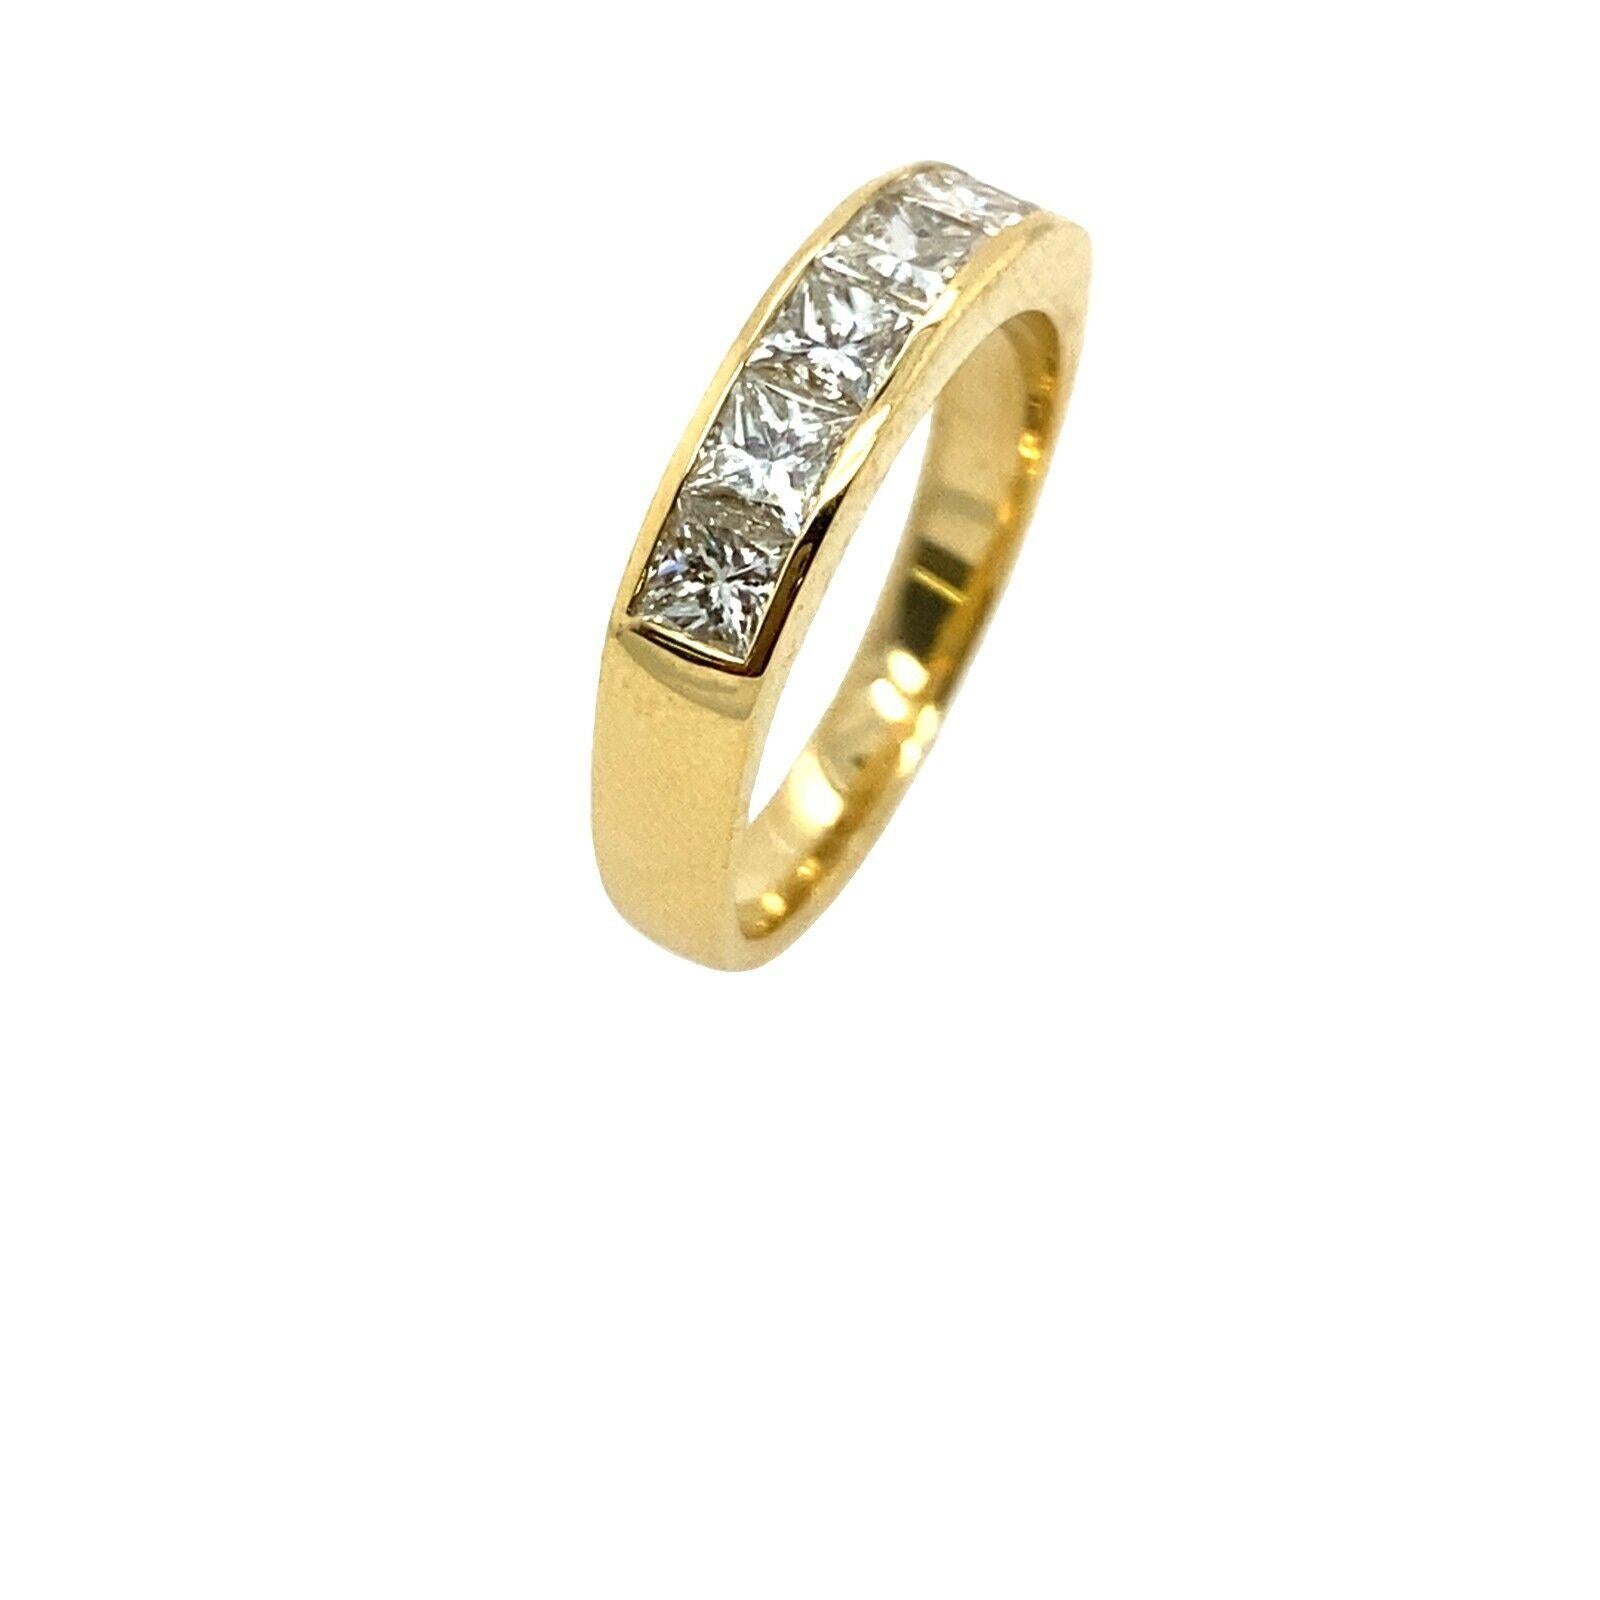 This stunning 18ct yellow gold ring is a perfect piece to have as an everyday wear. This gorgeous ring is set with a total of 1.28ct princess cut diamonds, it is made of 18ct yellow gold and is very comfortable to wear. It is the perfect choice for